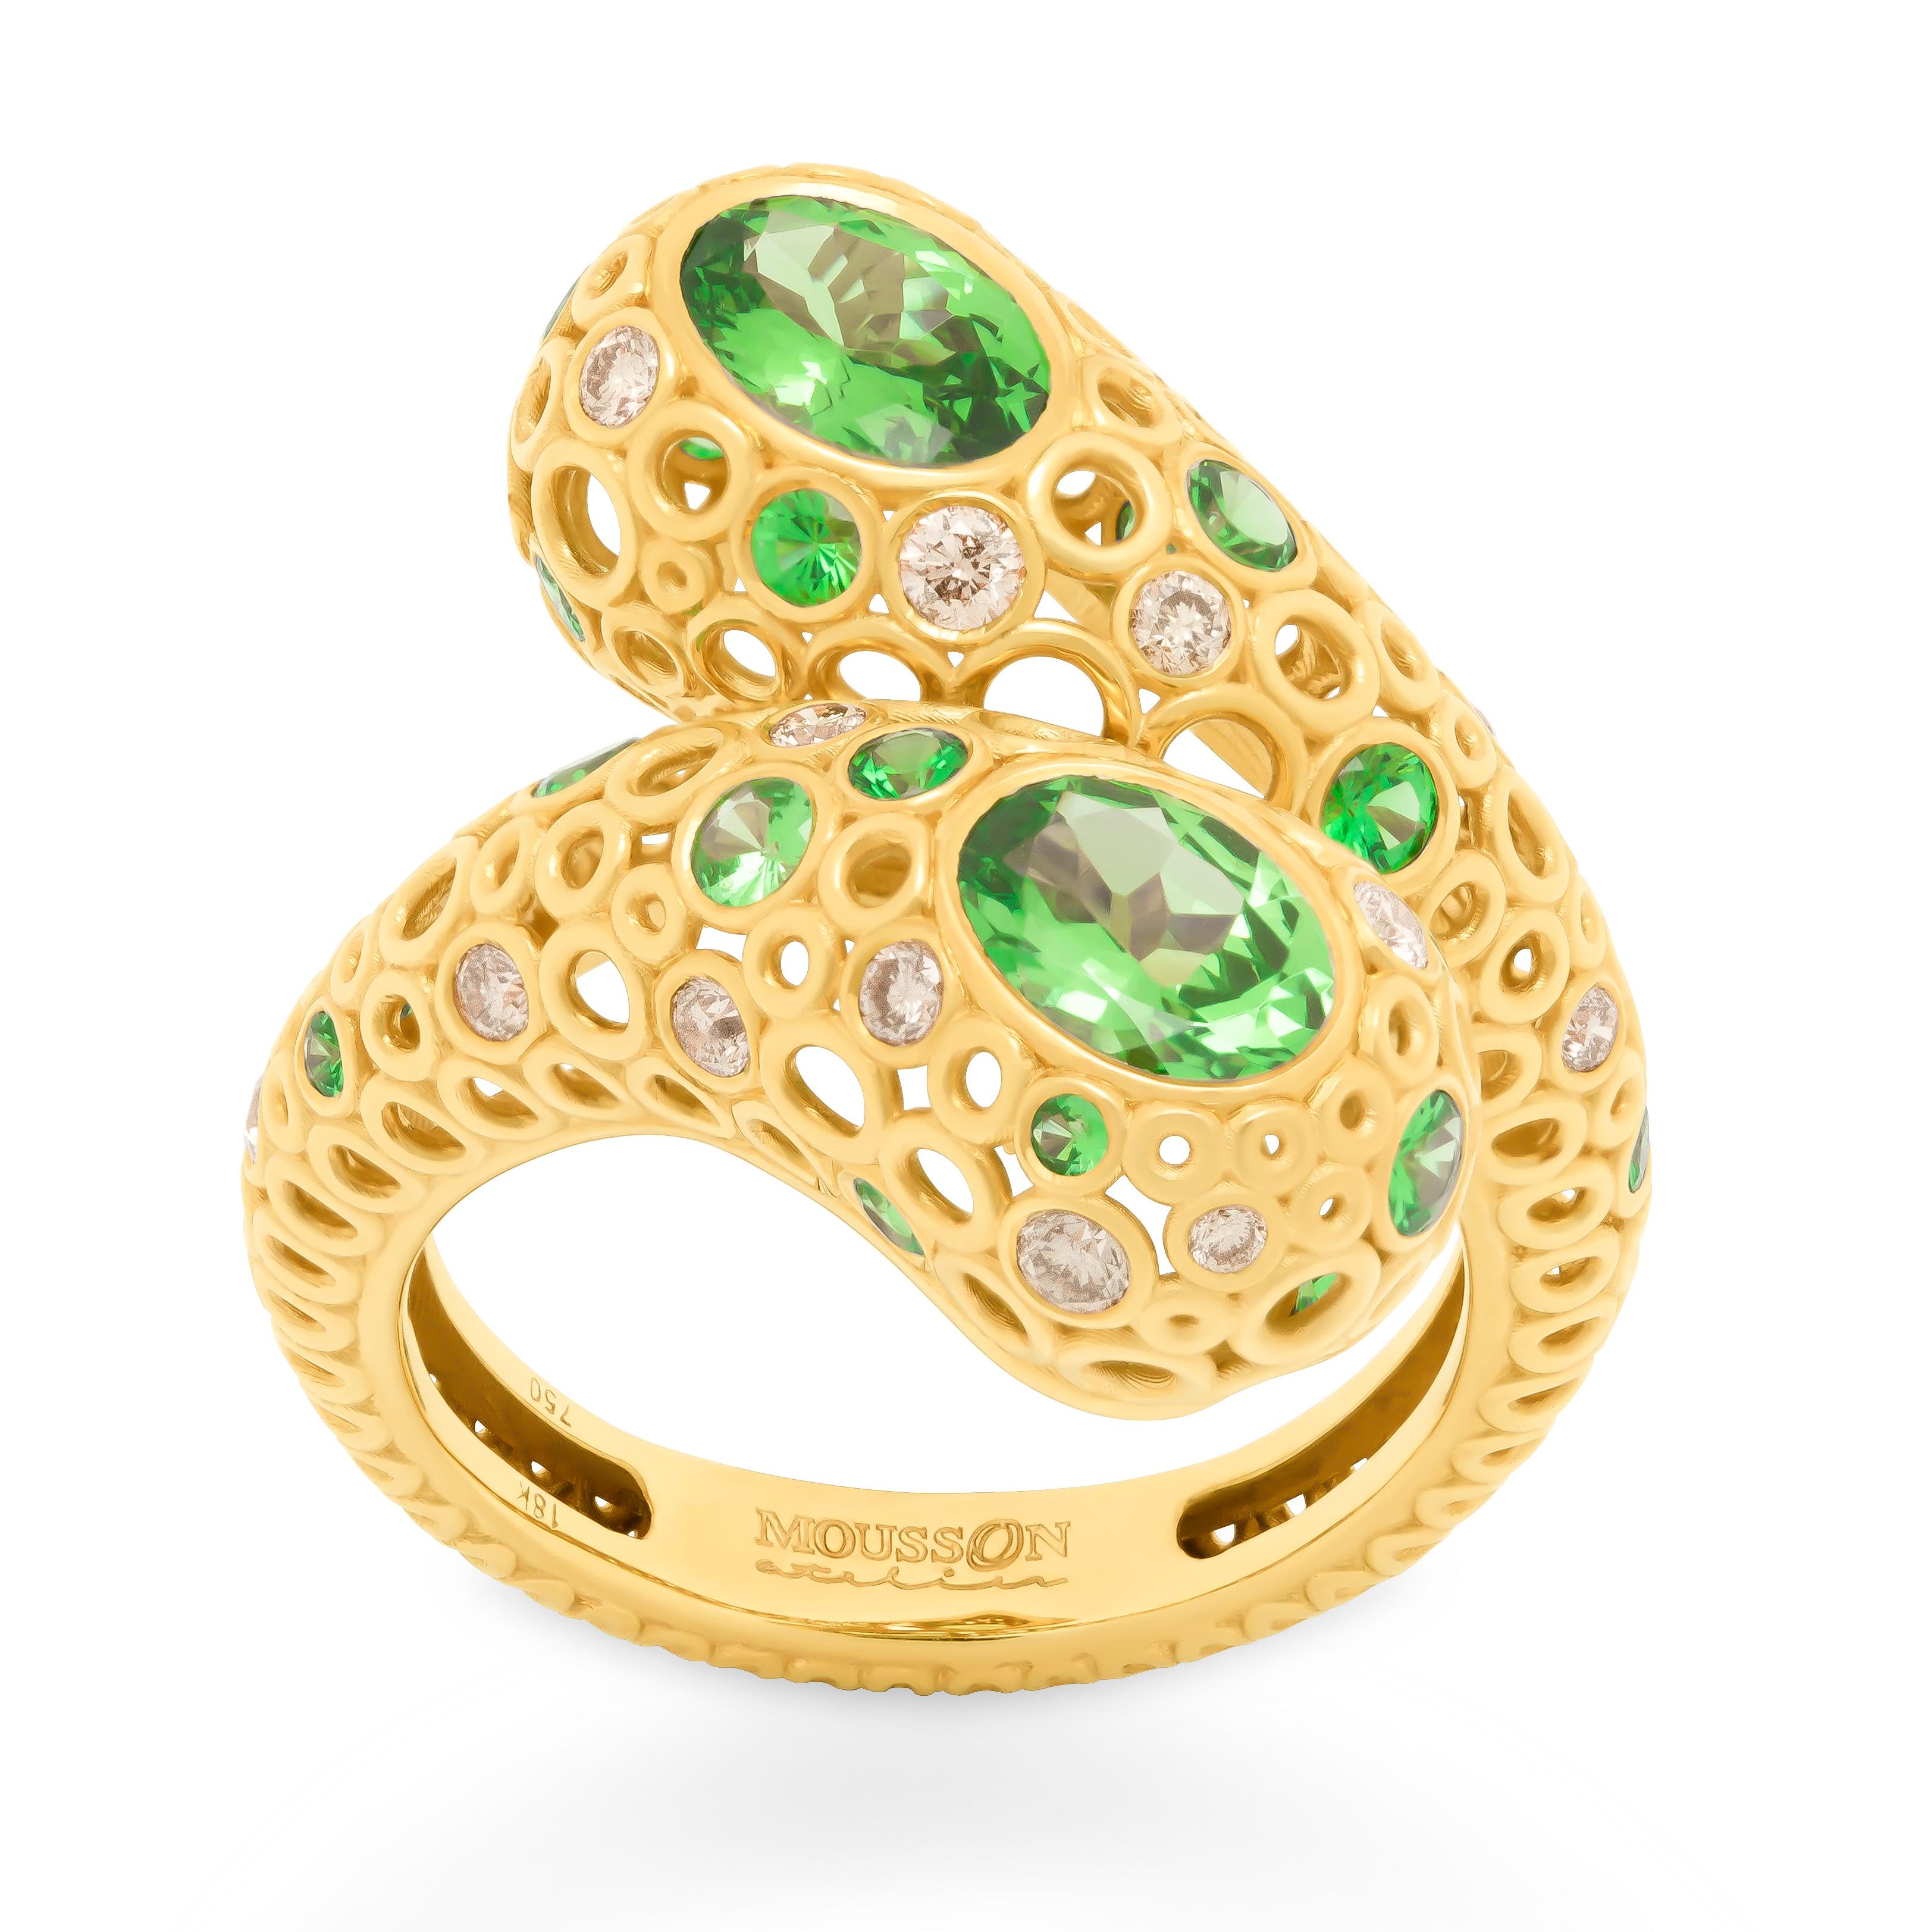 Tsavorites 1.50 Carat Champagne Diamonds 18 Karat Yellow Gold Bubble Ring
Incredibly light and airy Ring from our Bubbles Collection. Yellow 18 Karat Gold is made in the form of variety of small bubbles, some of which have 19 Tsavorites and 15